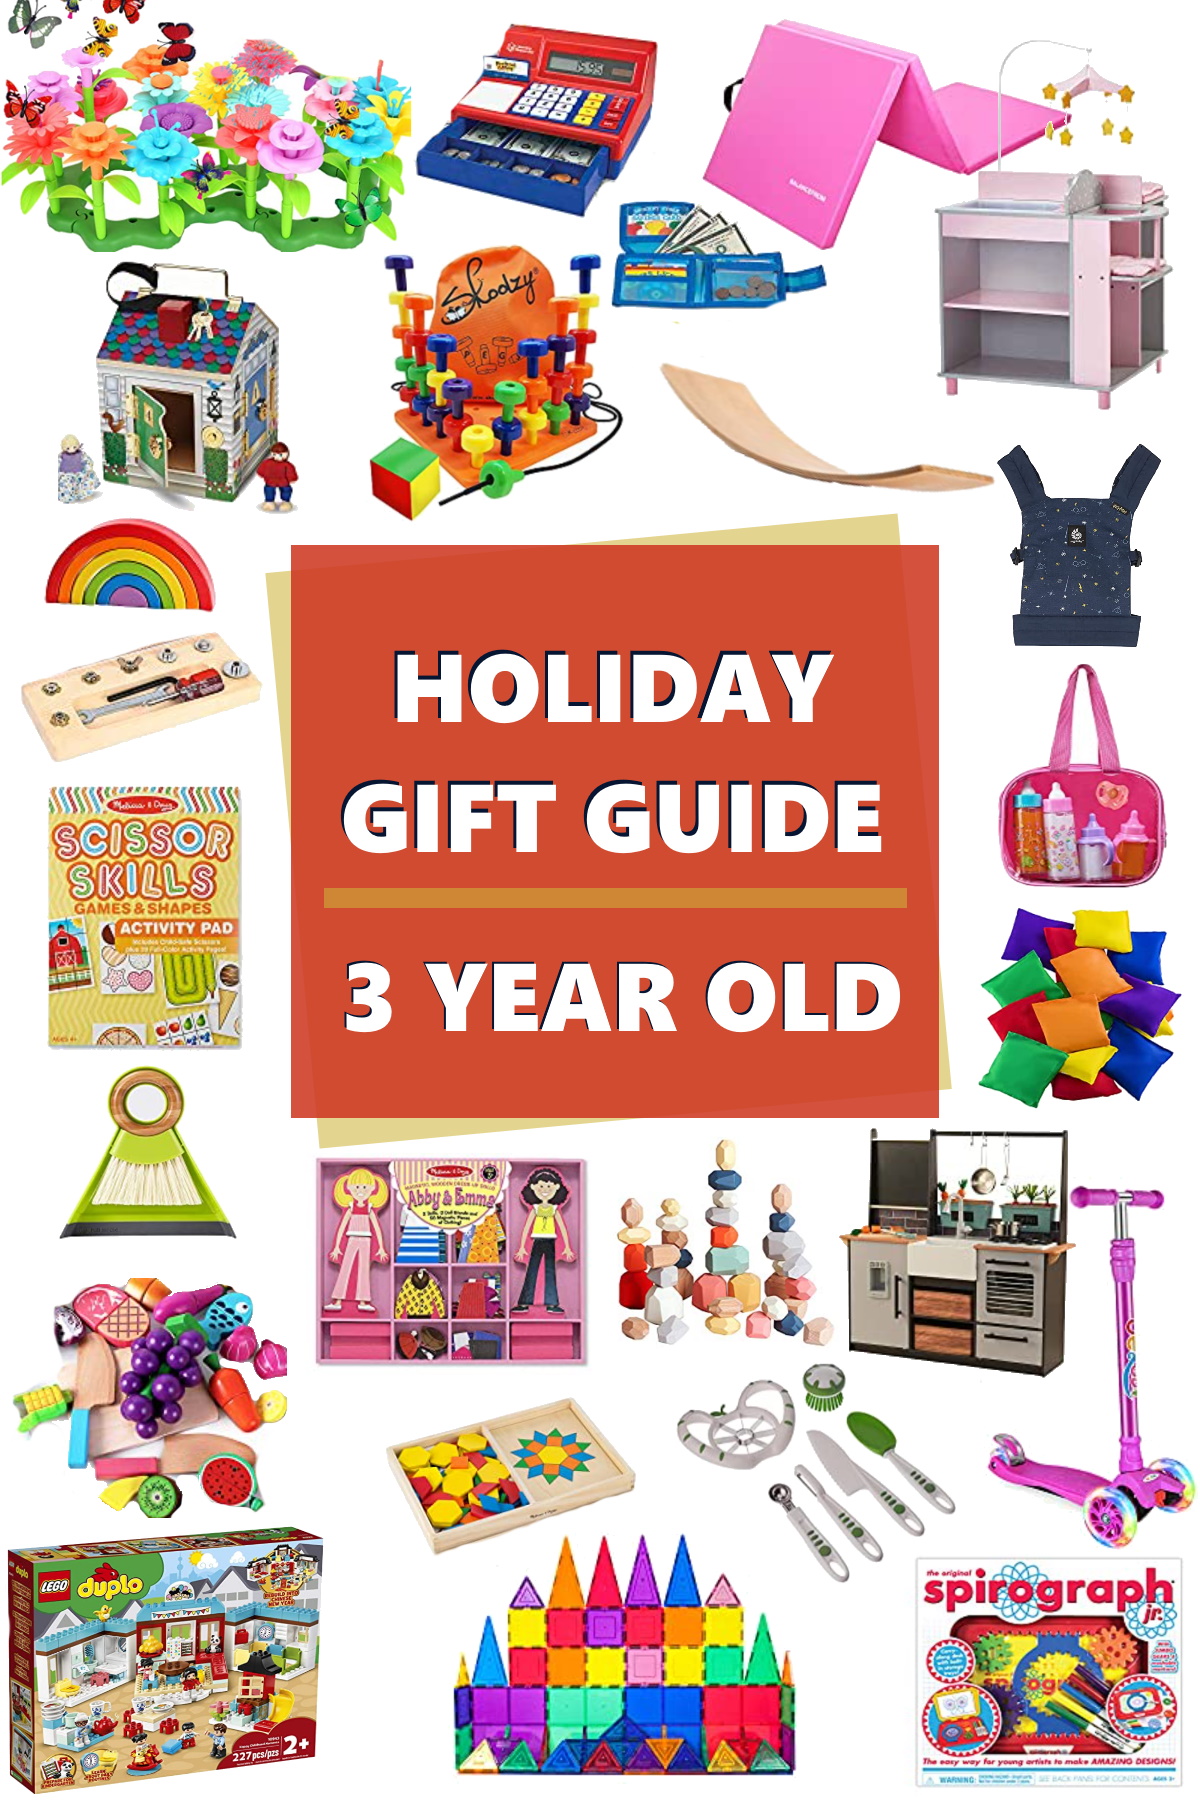 Best Gifts for 3 Year Old Preschooler